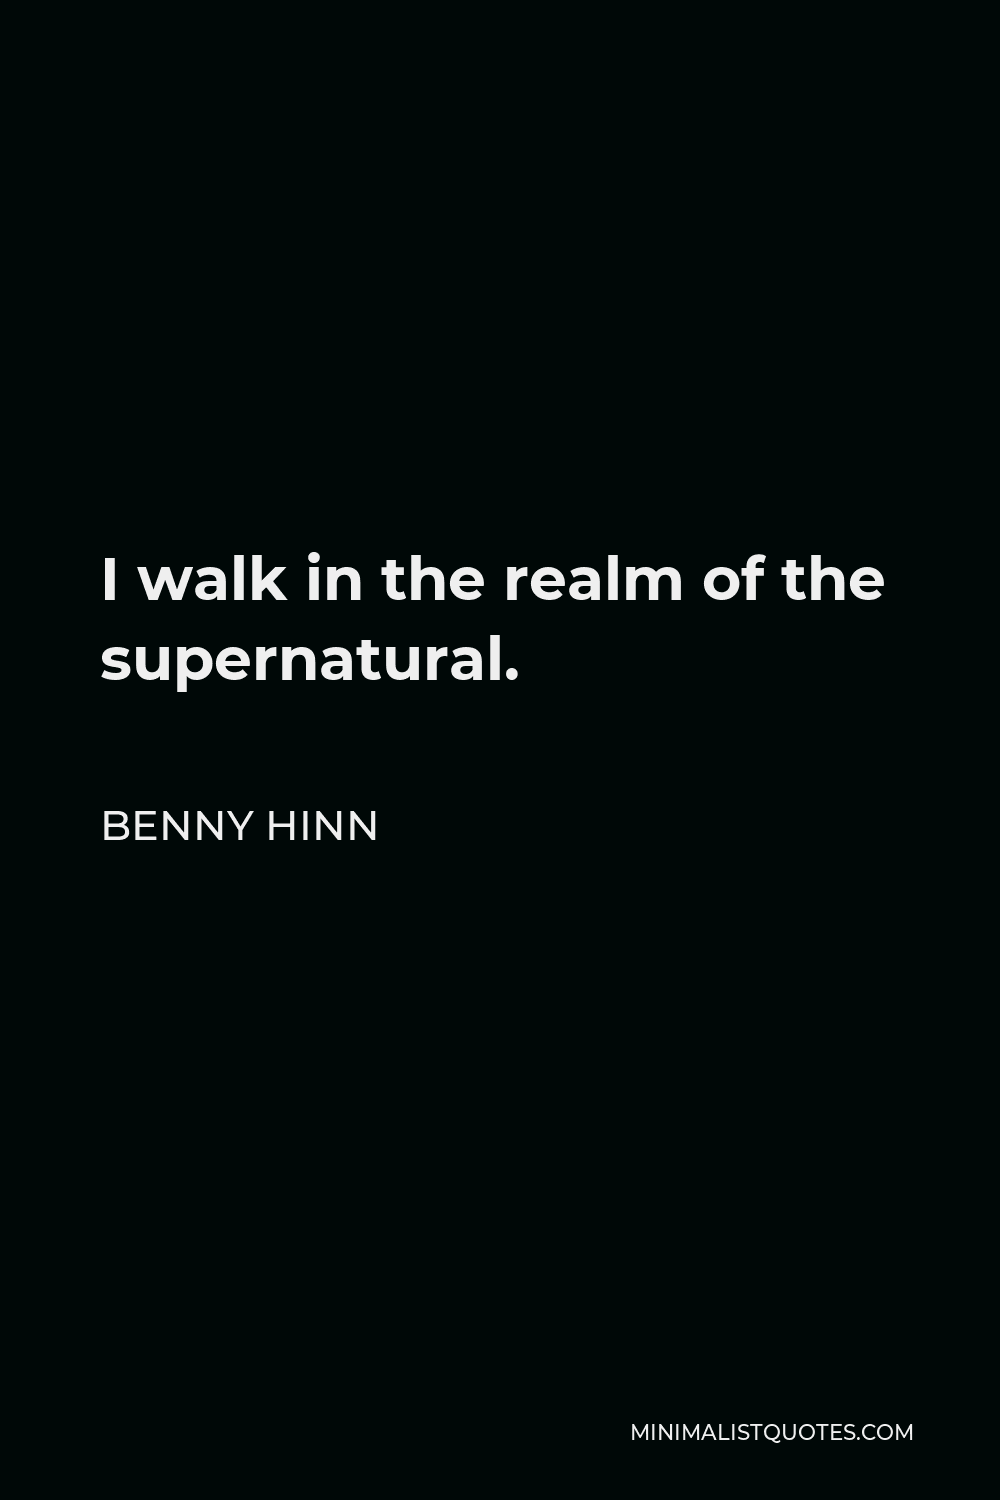 Benny Hinn Quote - I walk in the realm of the supernatural.